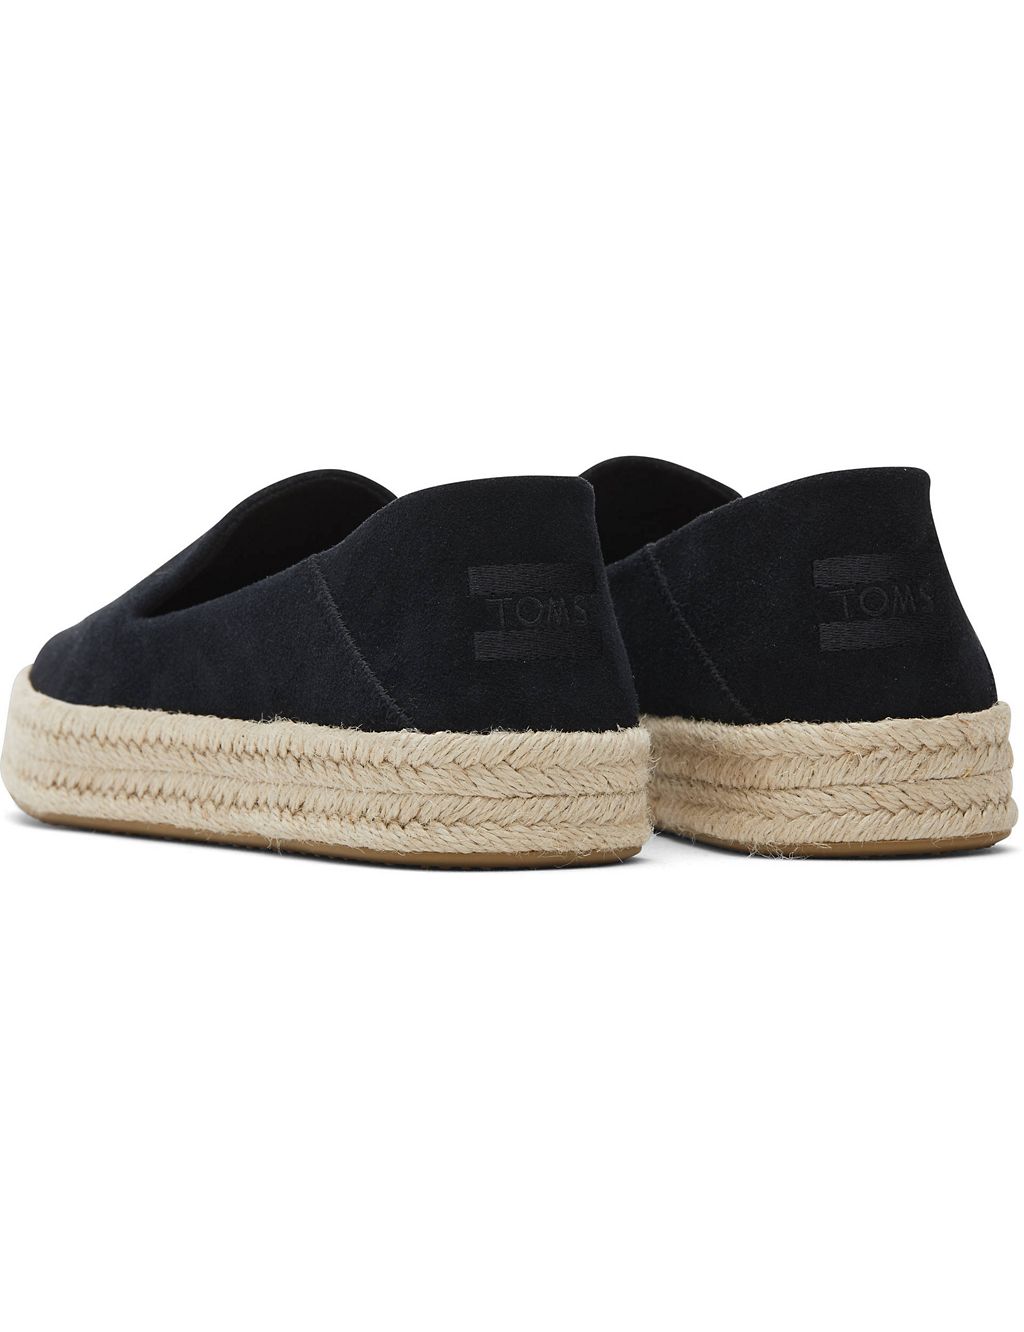 Leather Flat Espadrilles 7 of 7